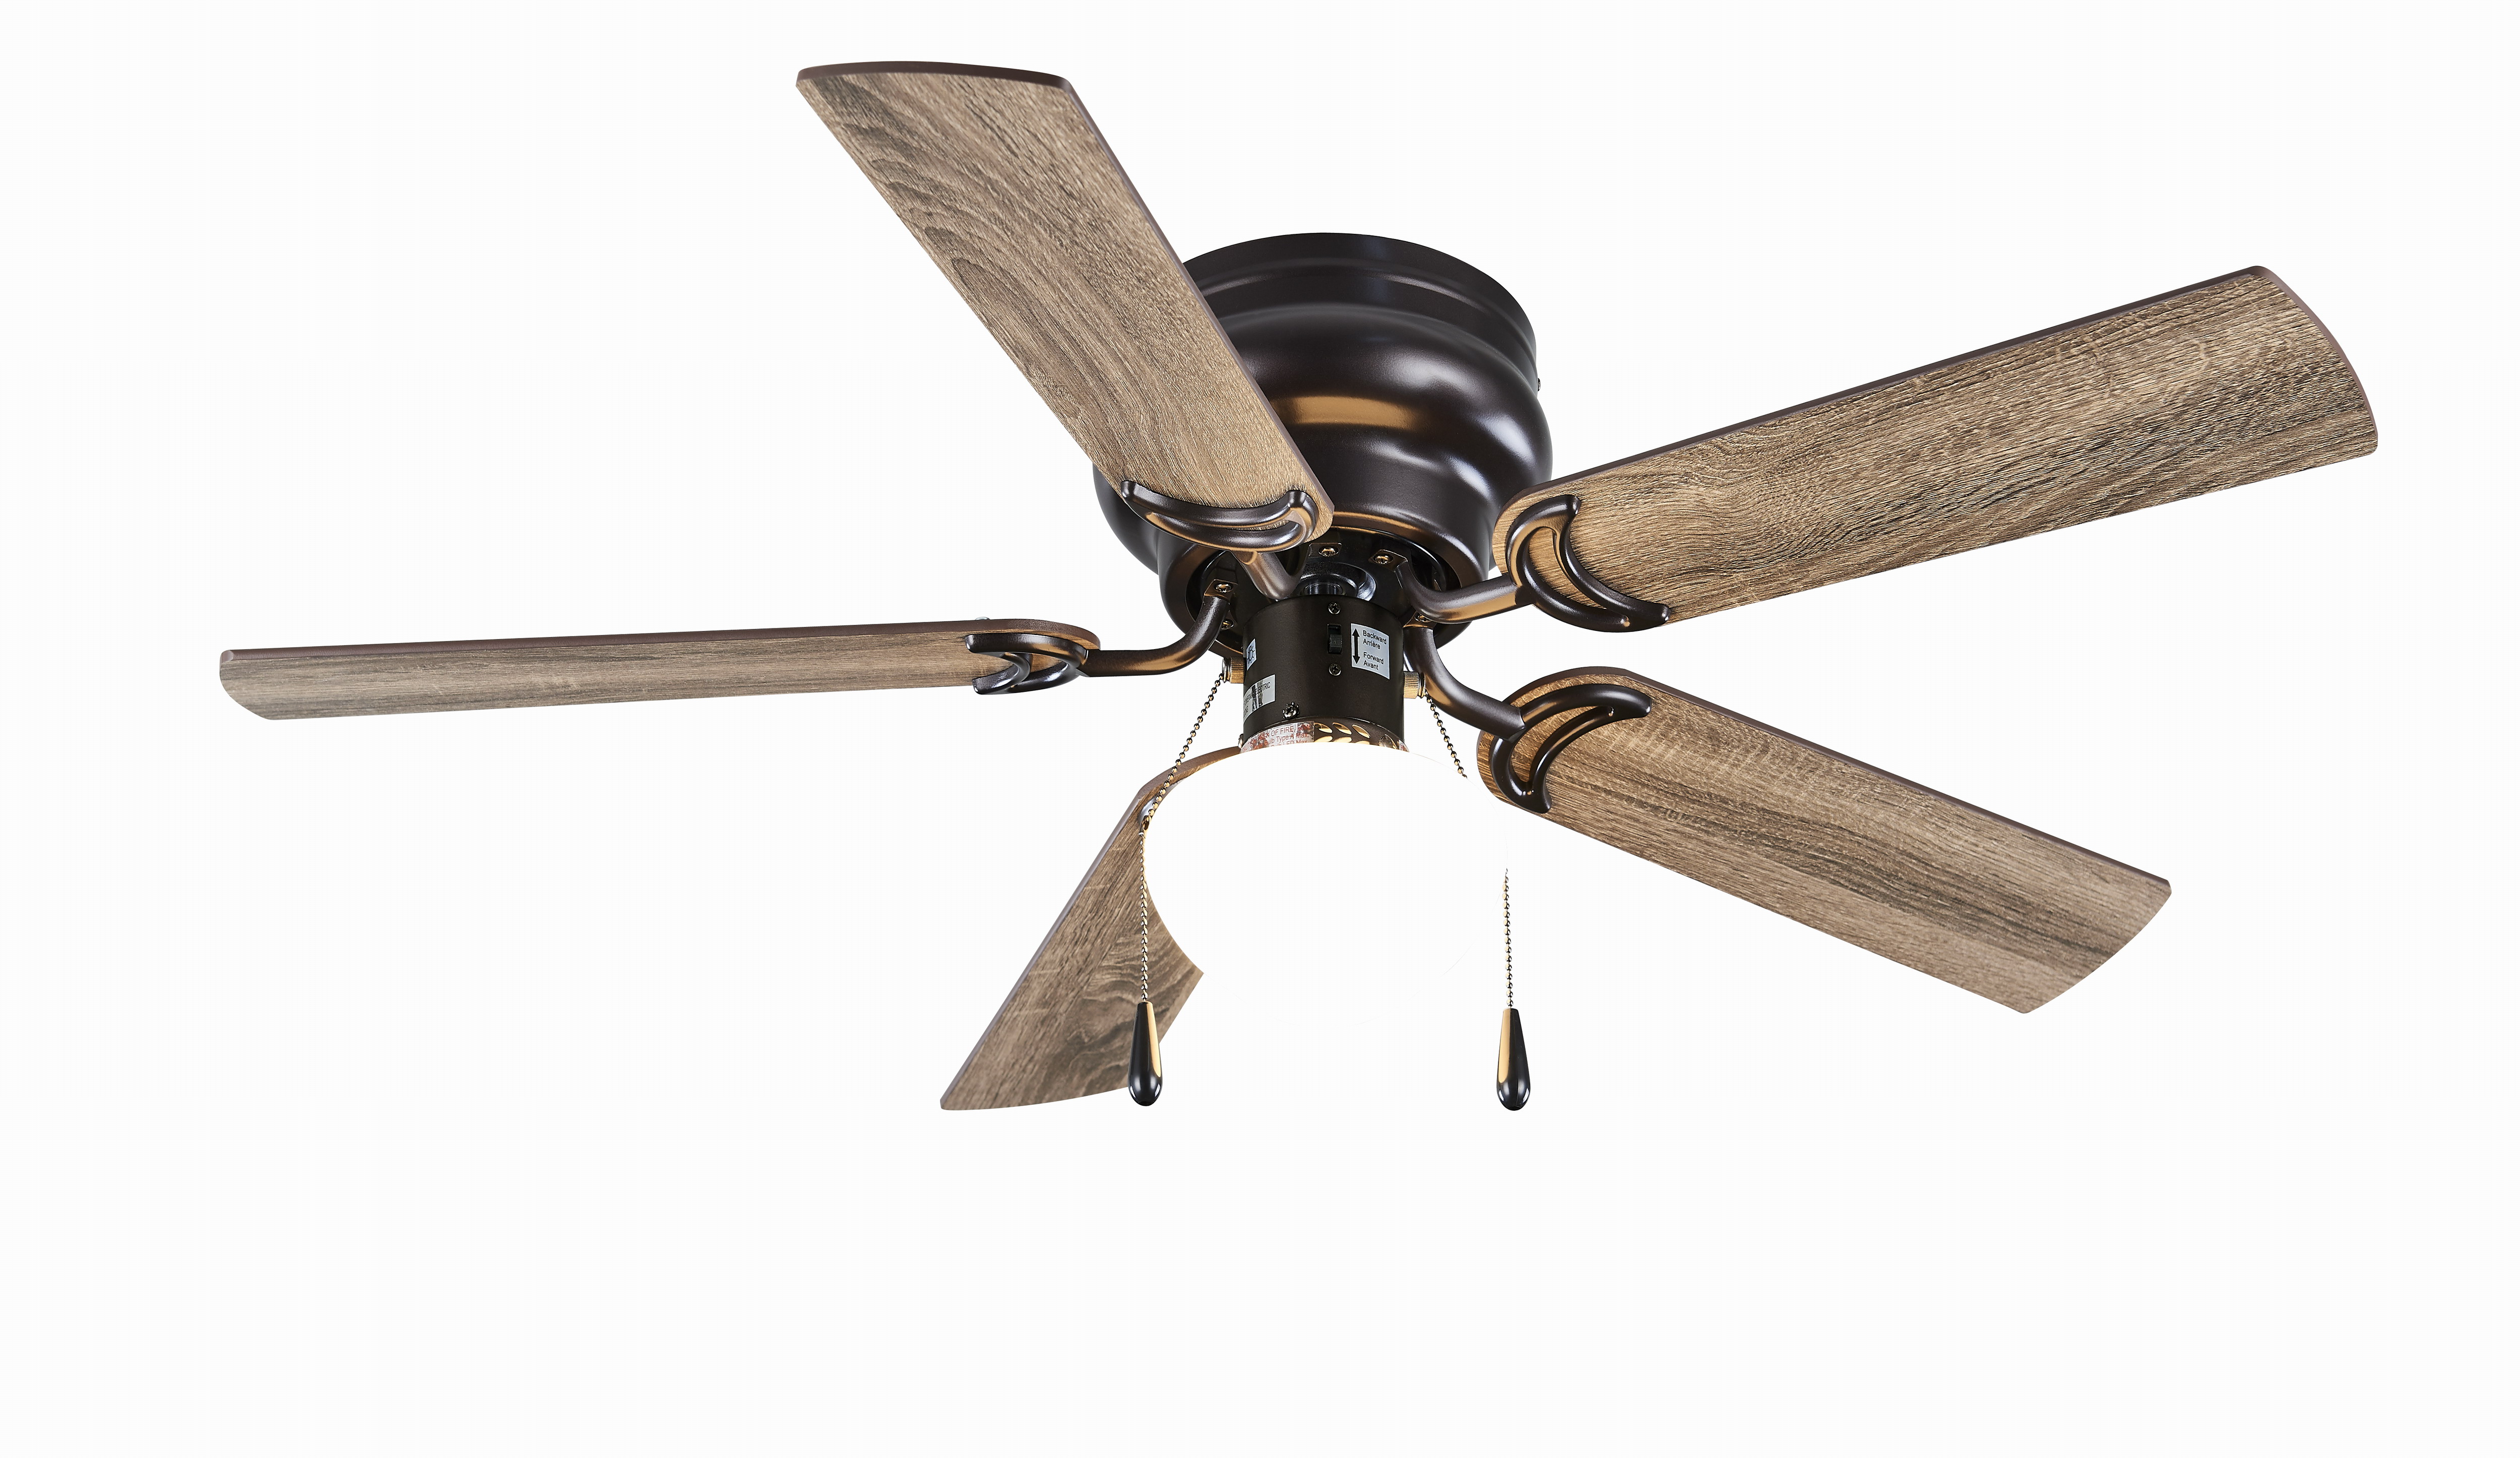 Mainstays 44" Hugger Indoor Ceiling Fan with Single Light, Bronze, 5 Blades, LED Bulb, Reverse Airflow - image 1 of 8